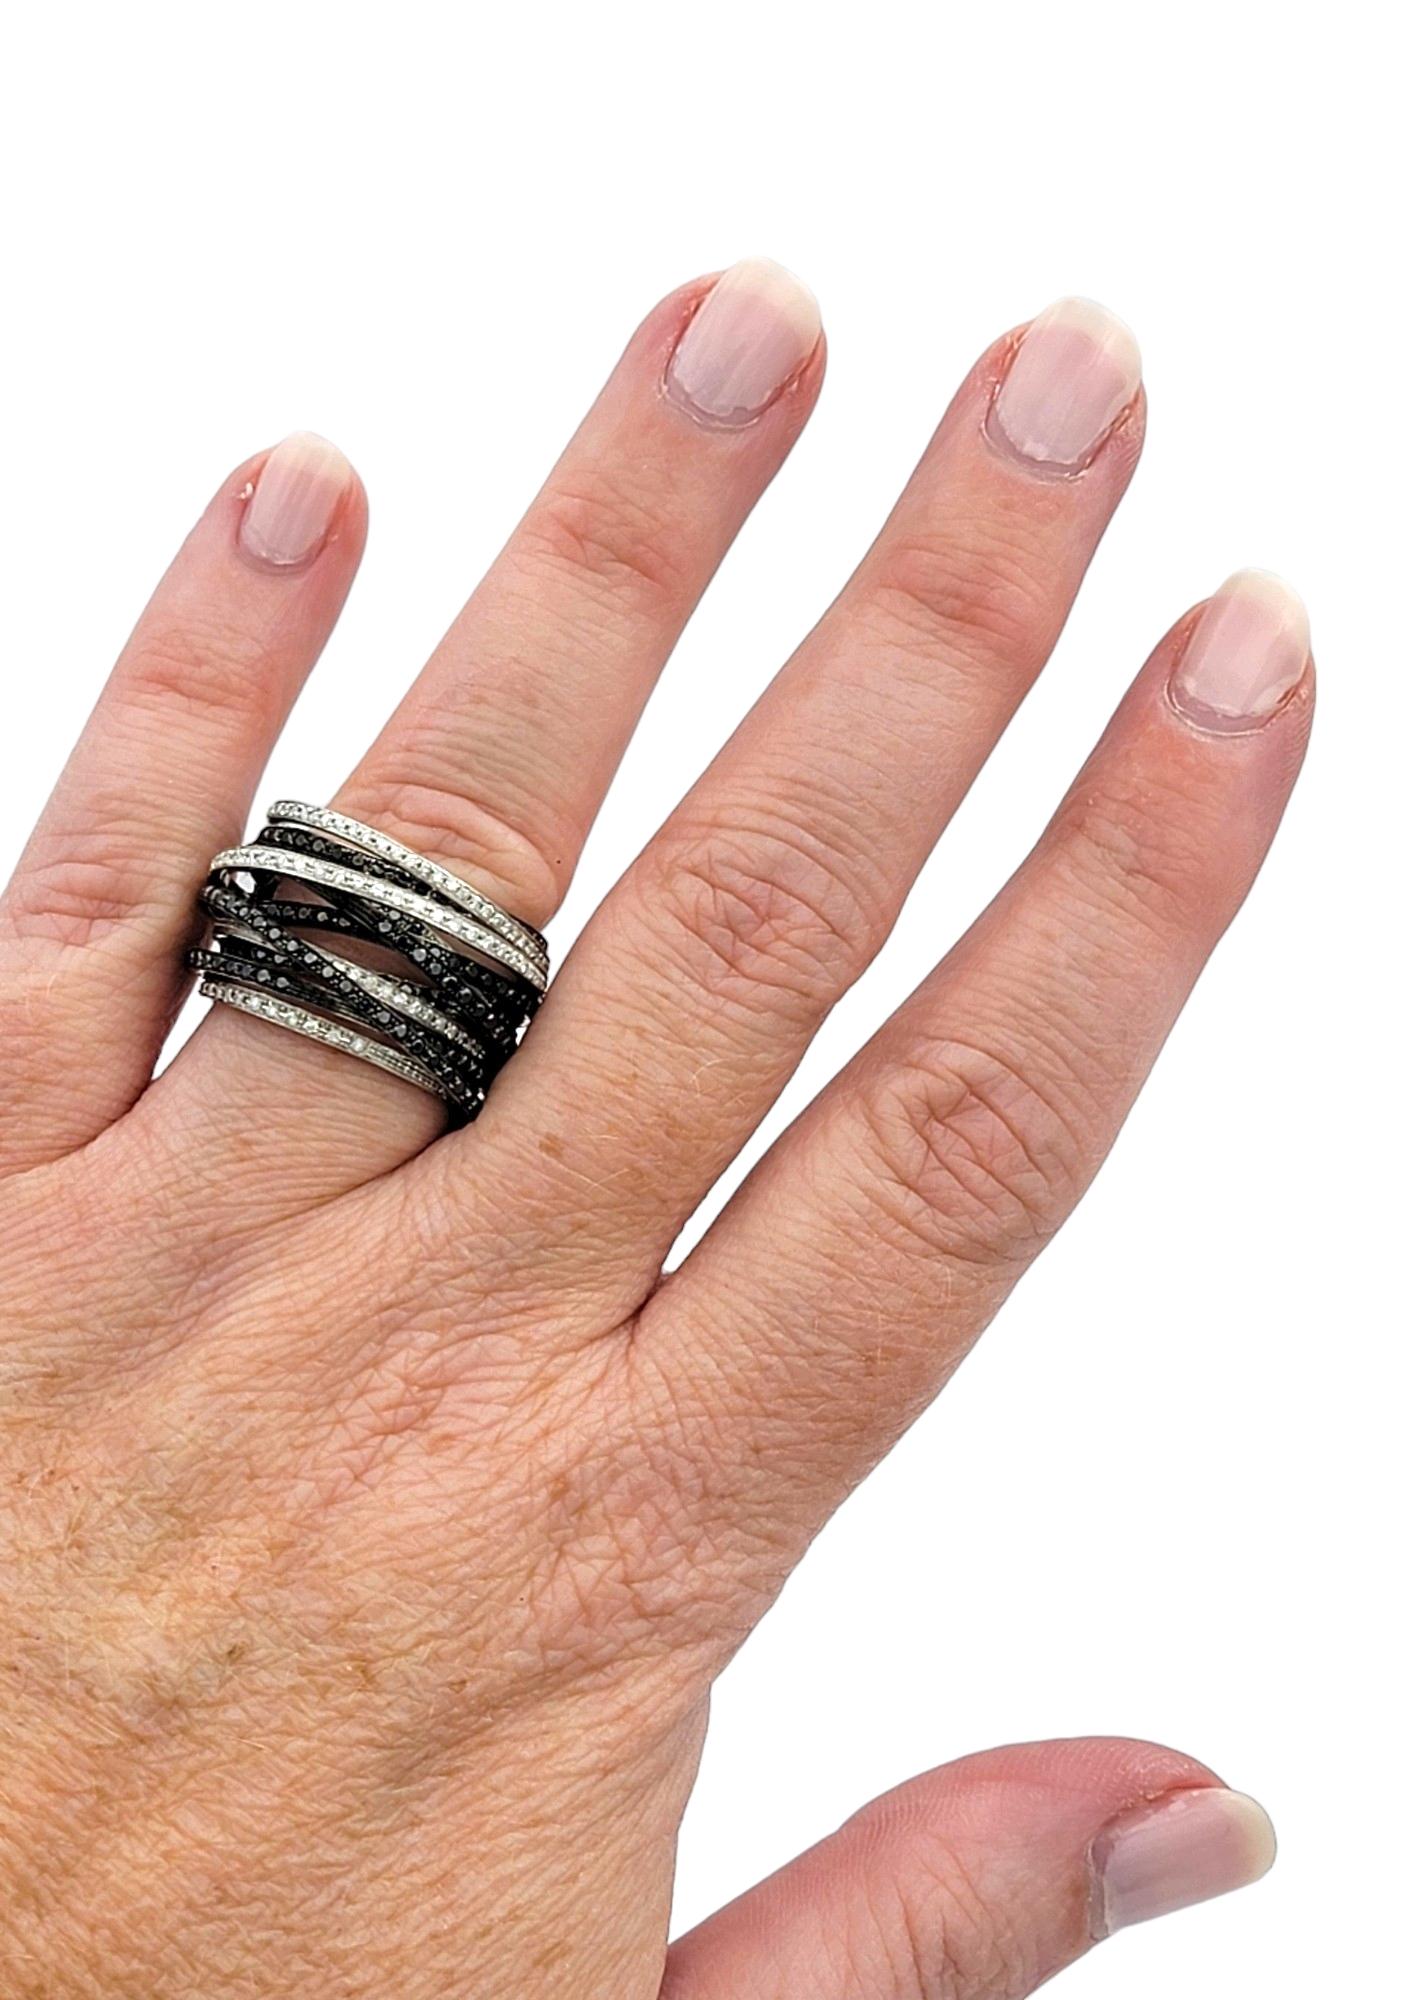 Black and White Diamond Multi-Row Layered Band Ring Set in 14 Karat White Gold For Sale 4